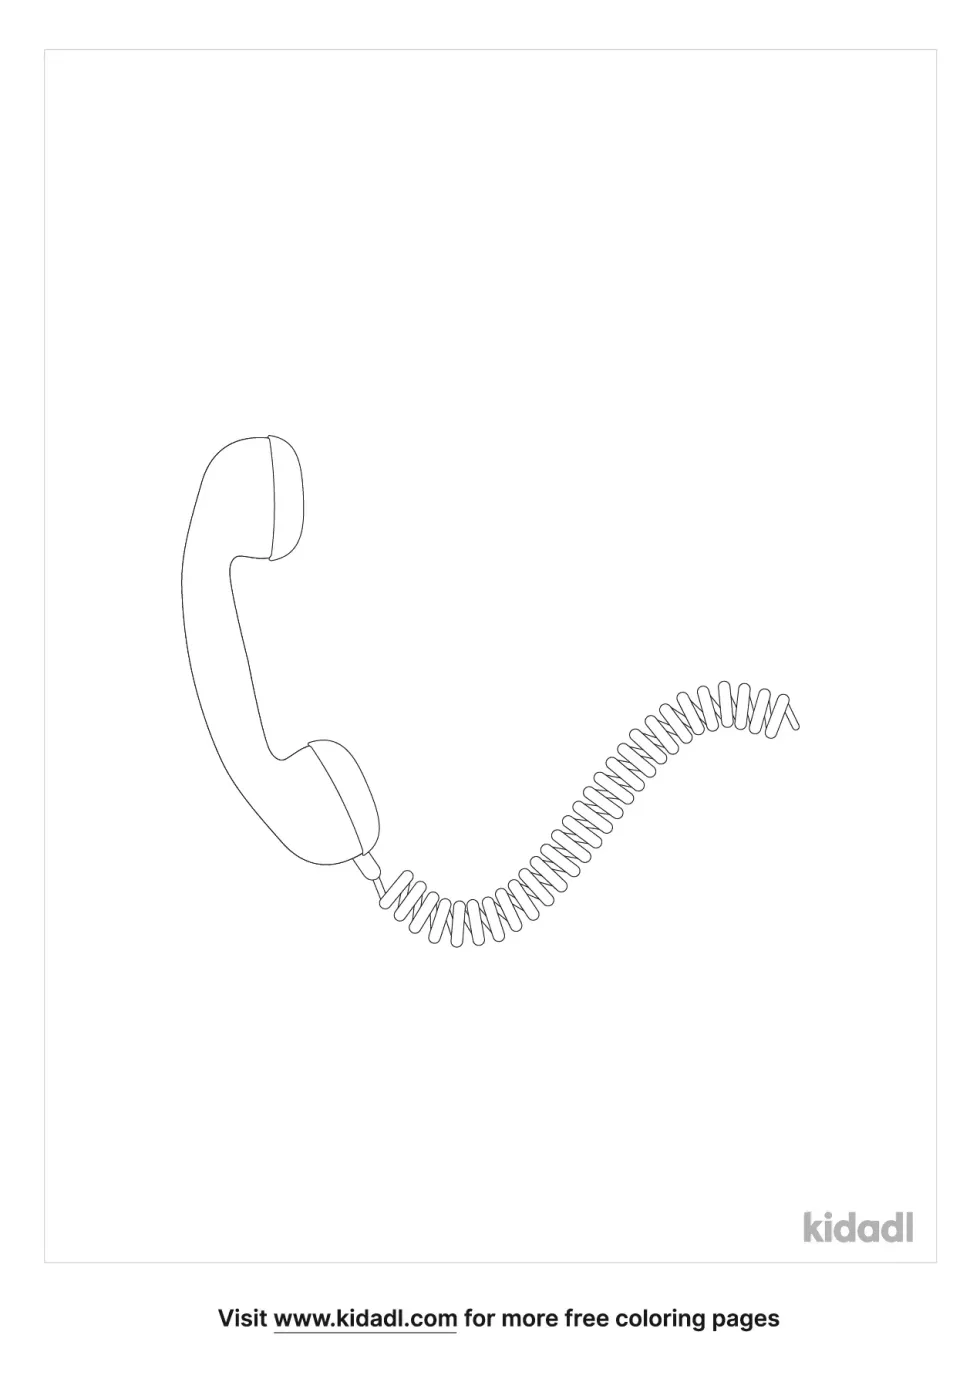 Telephone Cord Coloring Page